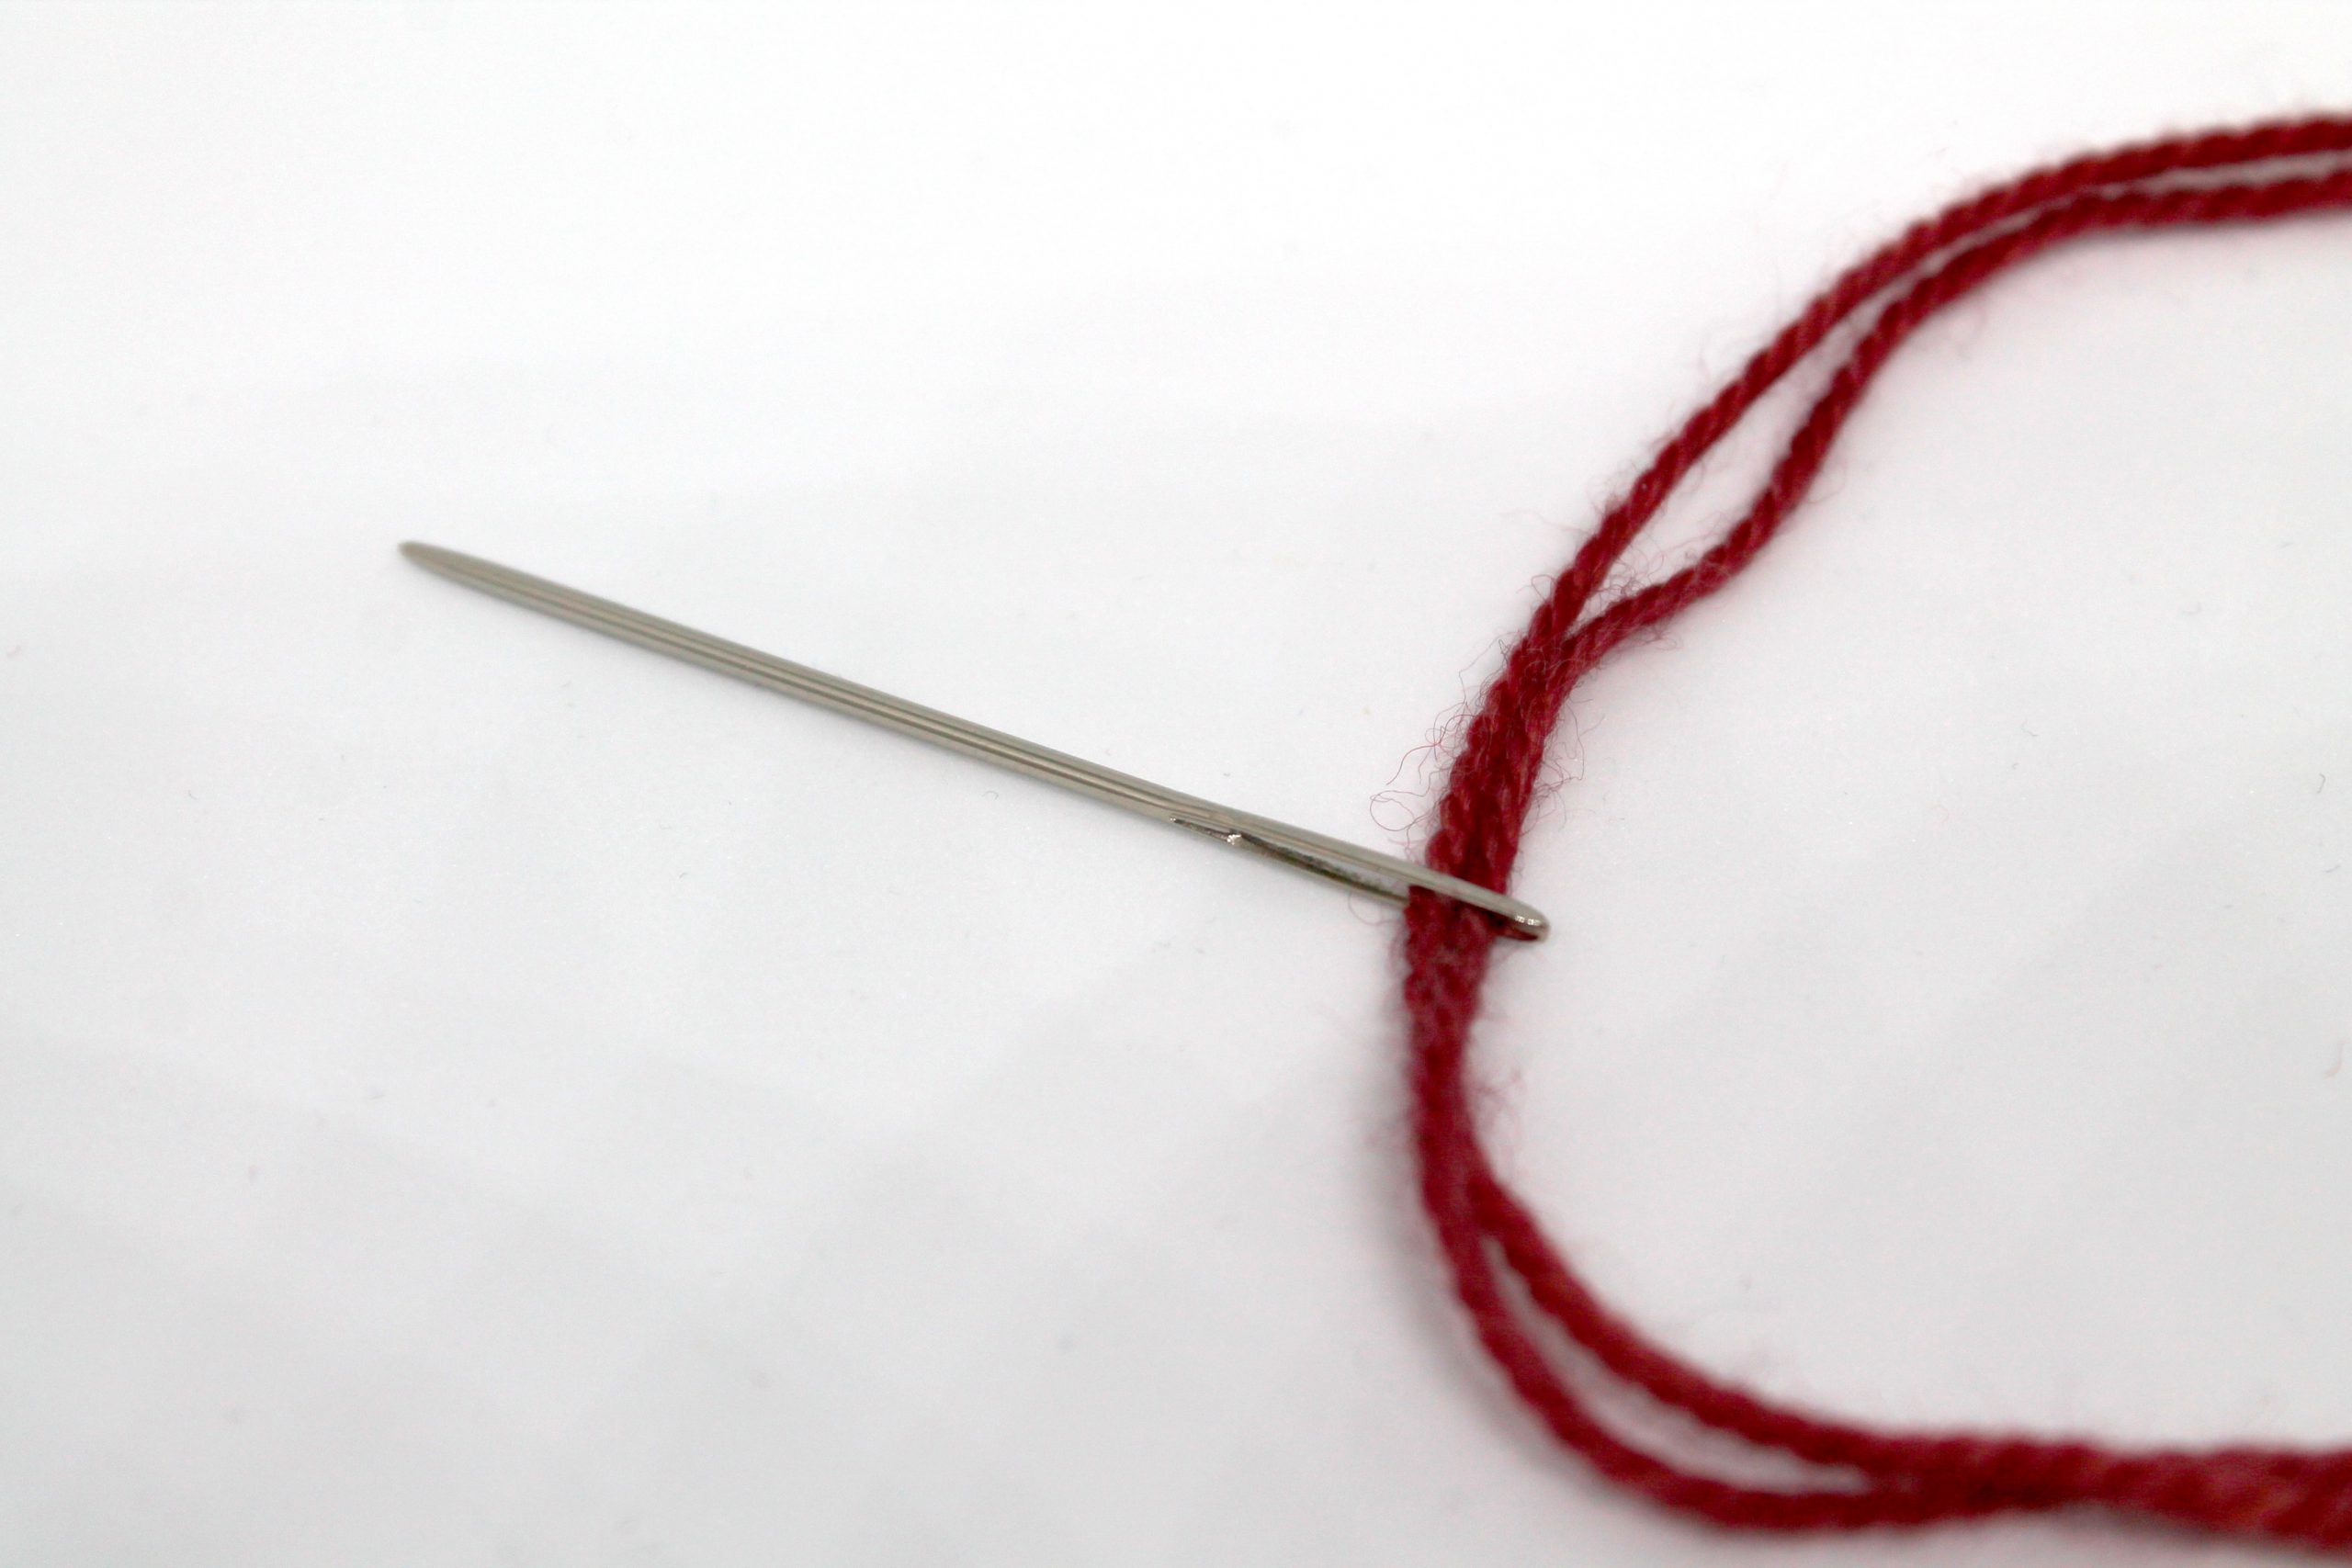 A tapestry needle with doubled yarn threaded through the eye